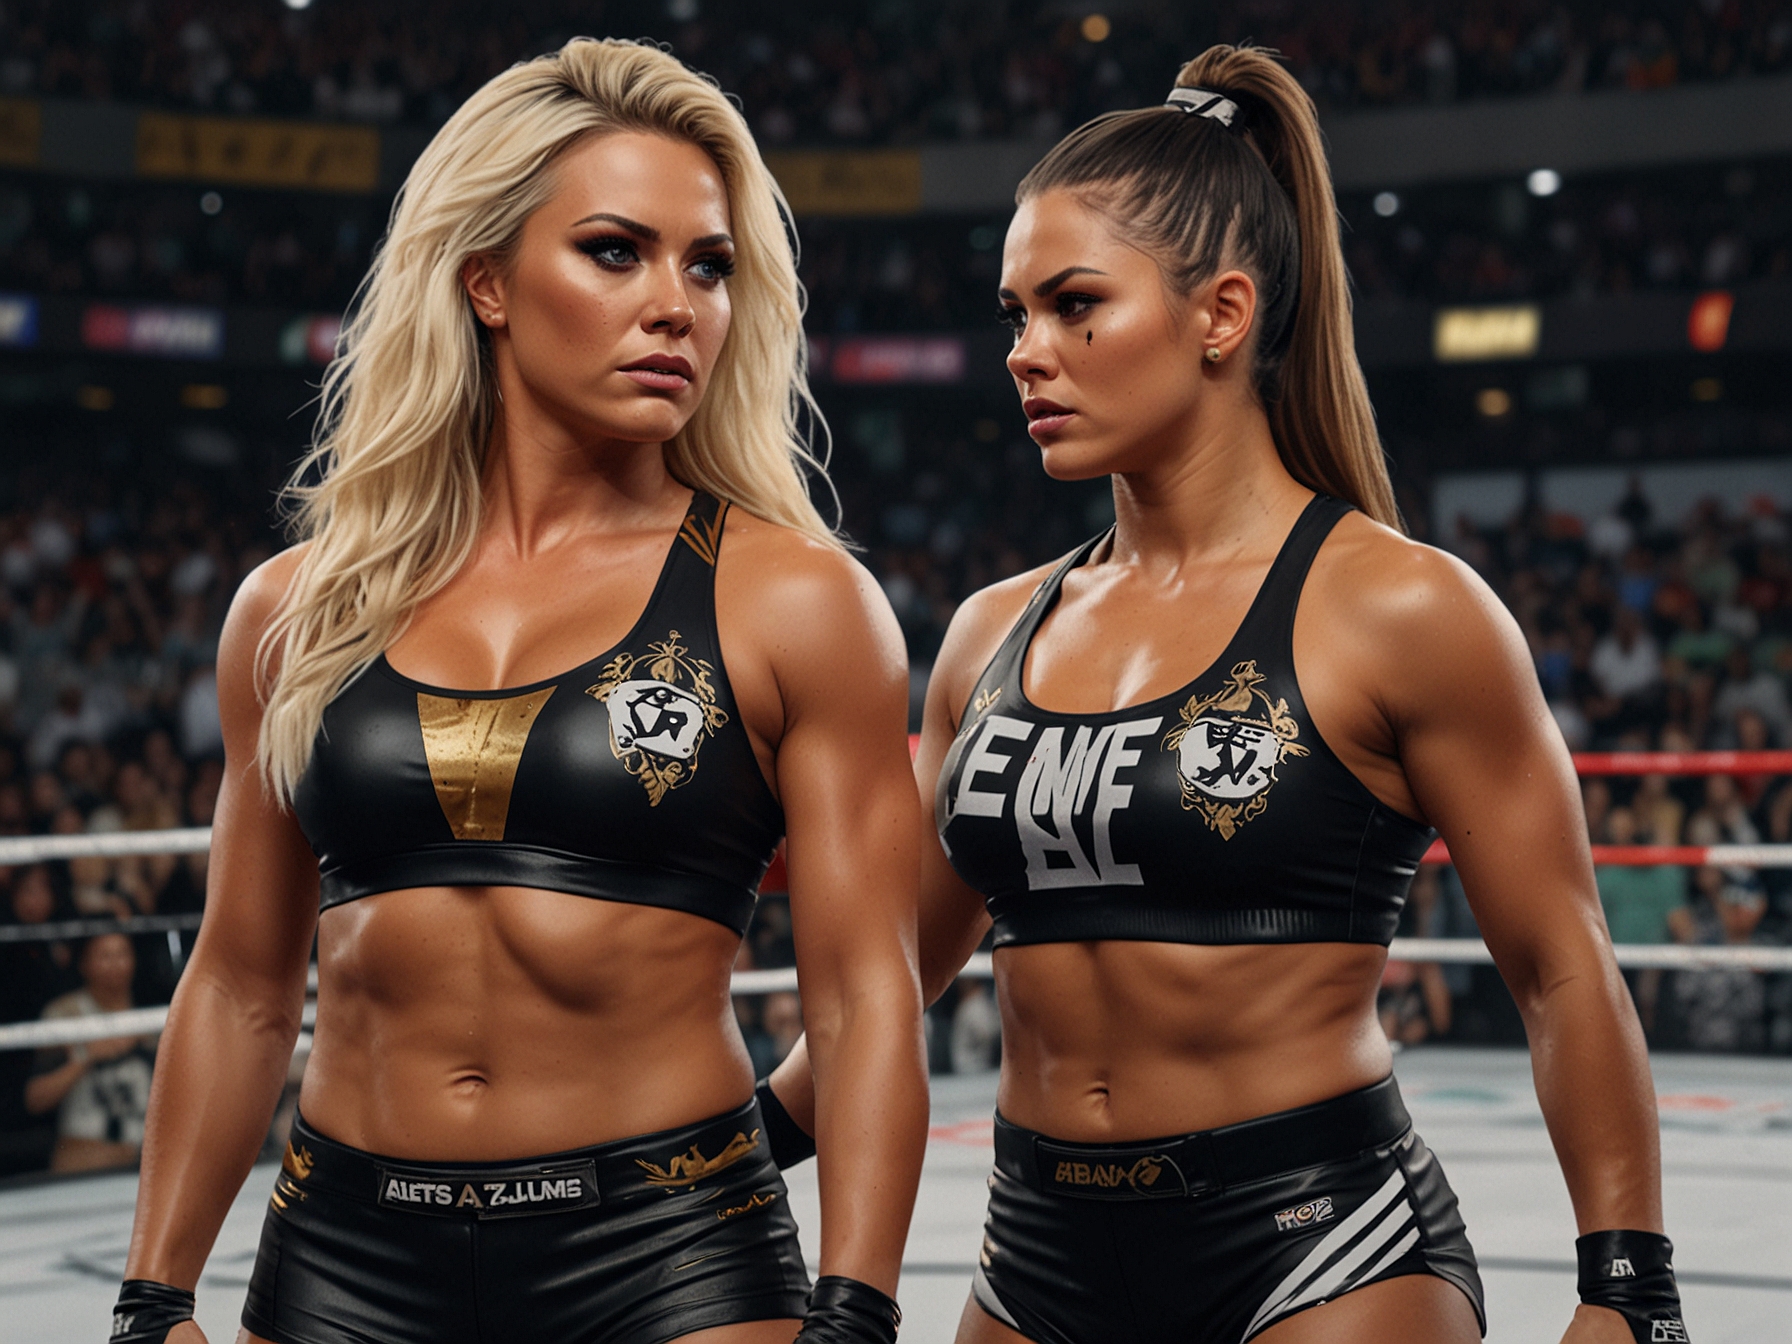 Mercedes Mone competes fiercely against Stephanie Vaquer in a winner-takes-all match, showcasing her skill and determination, and triumphing to claim both AEW TBS and NJPW Strong Women's titles.